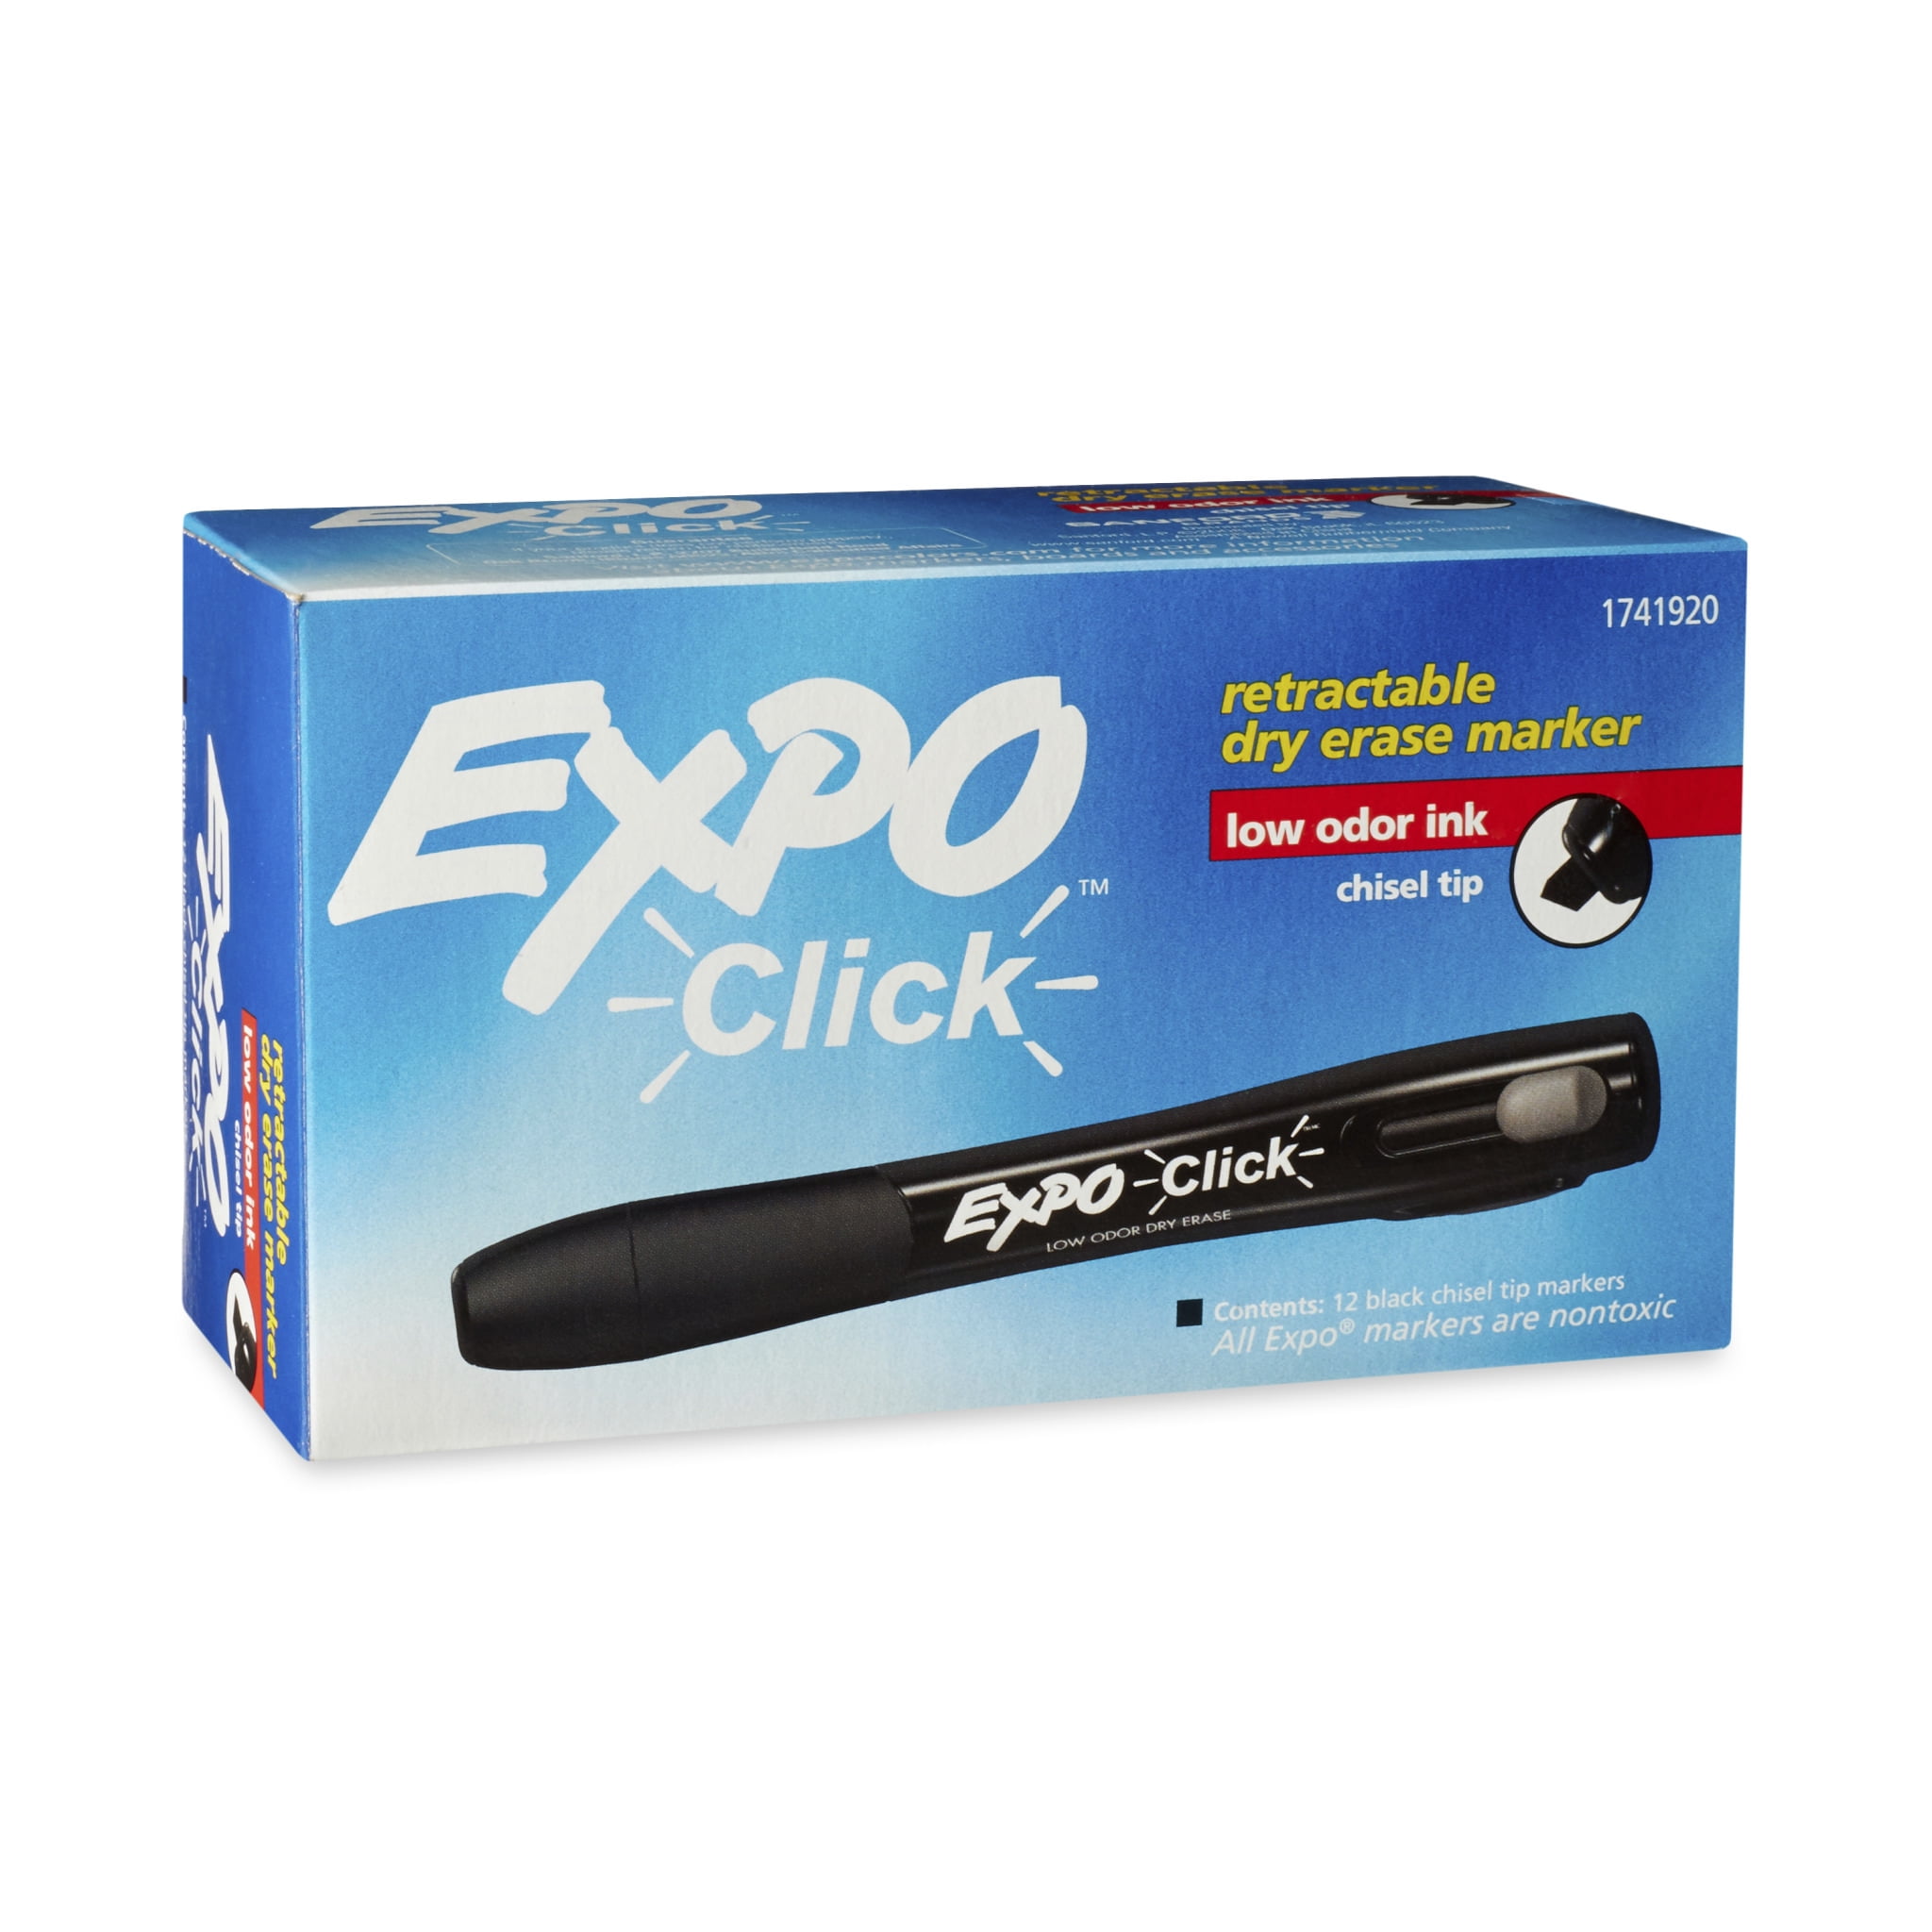 Factory Sealed Expo Blue Bright Stick Markers Brand New 12 Pack 